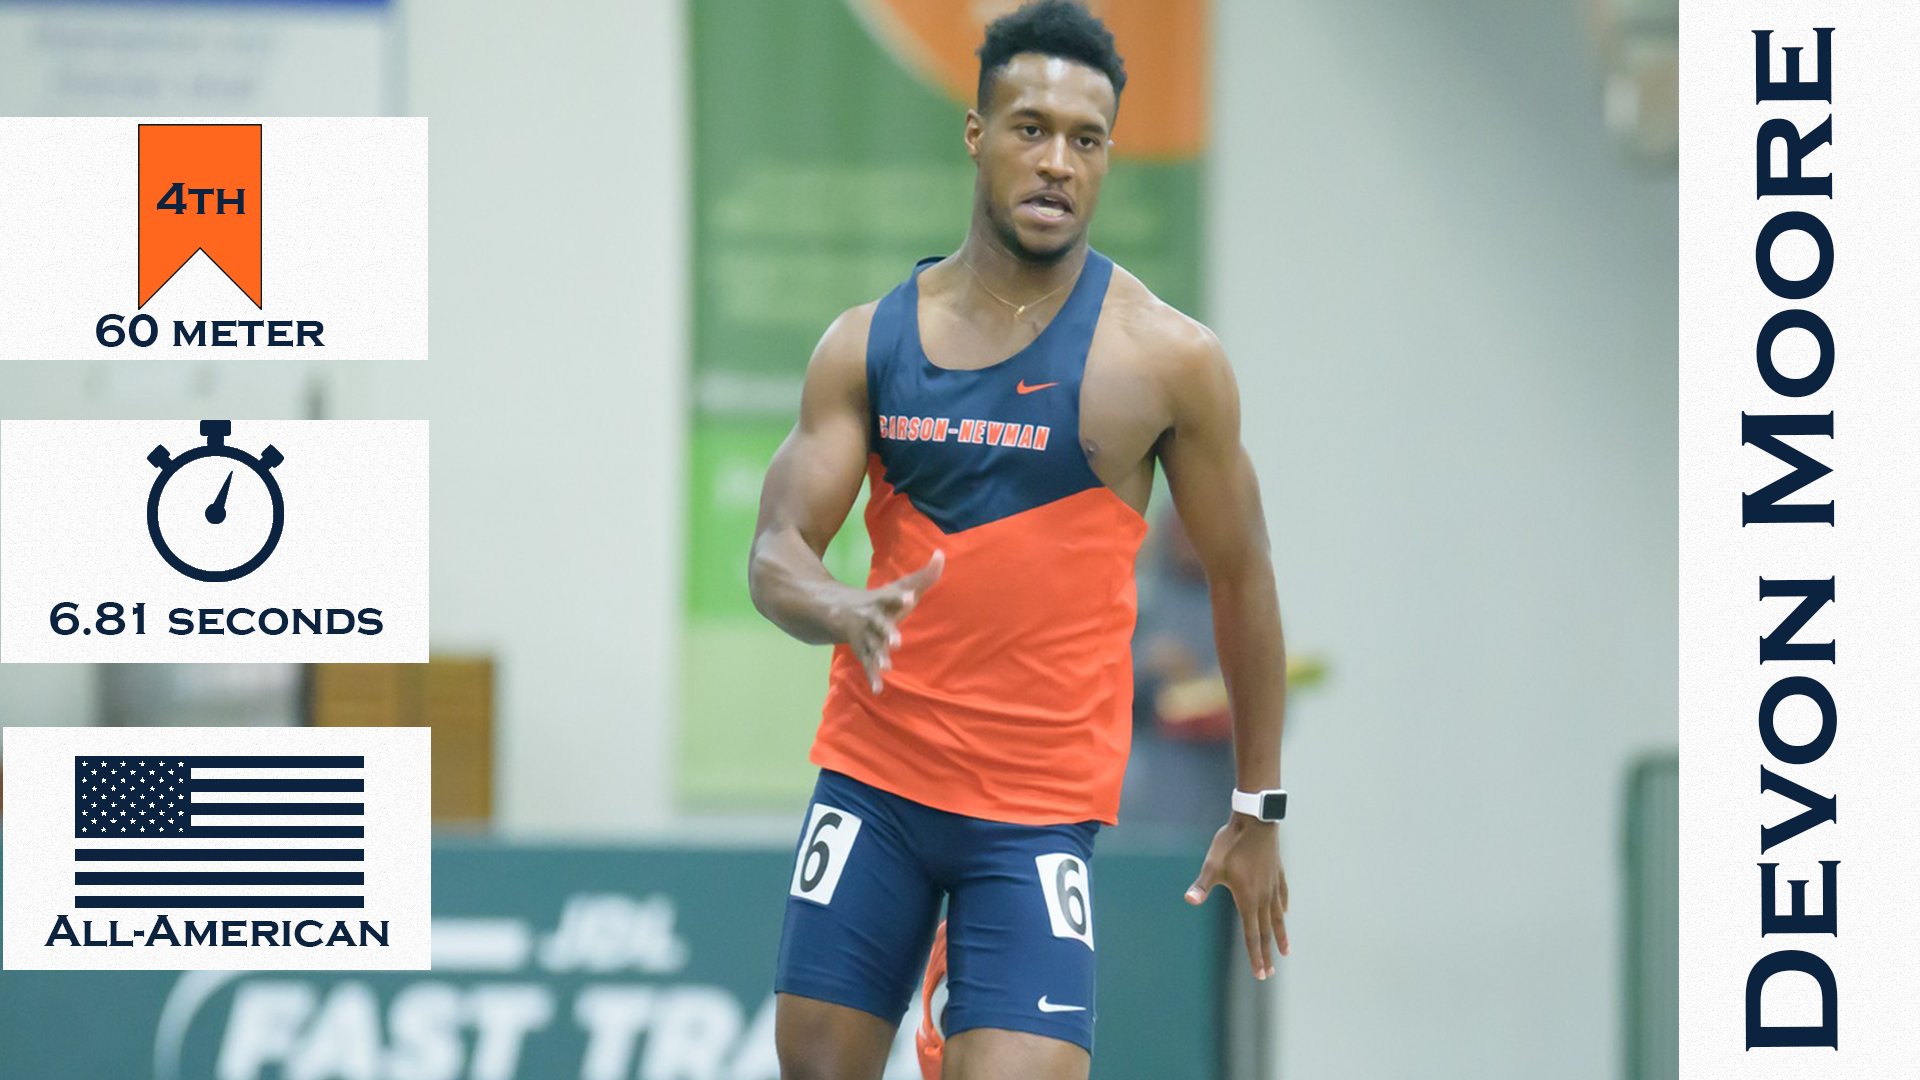 Moore wraps up indoor season with two fourth place finishes